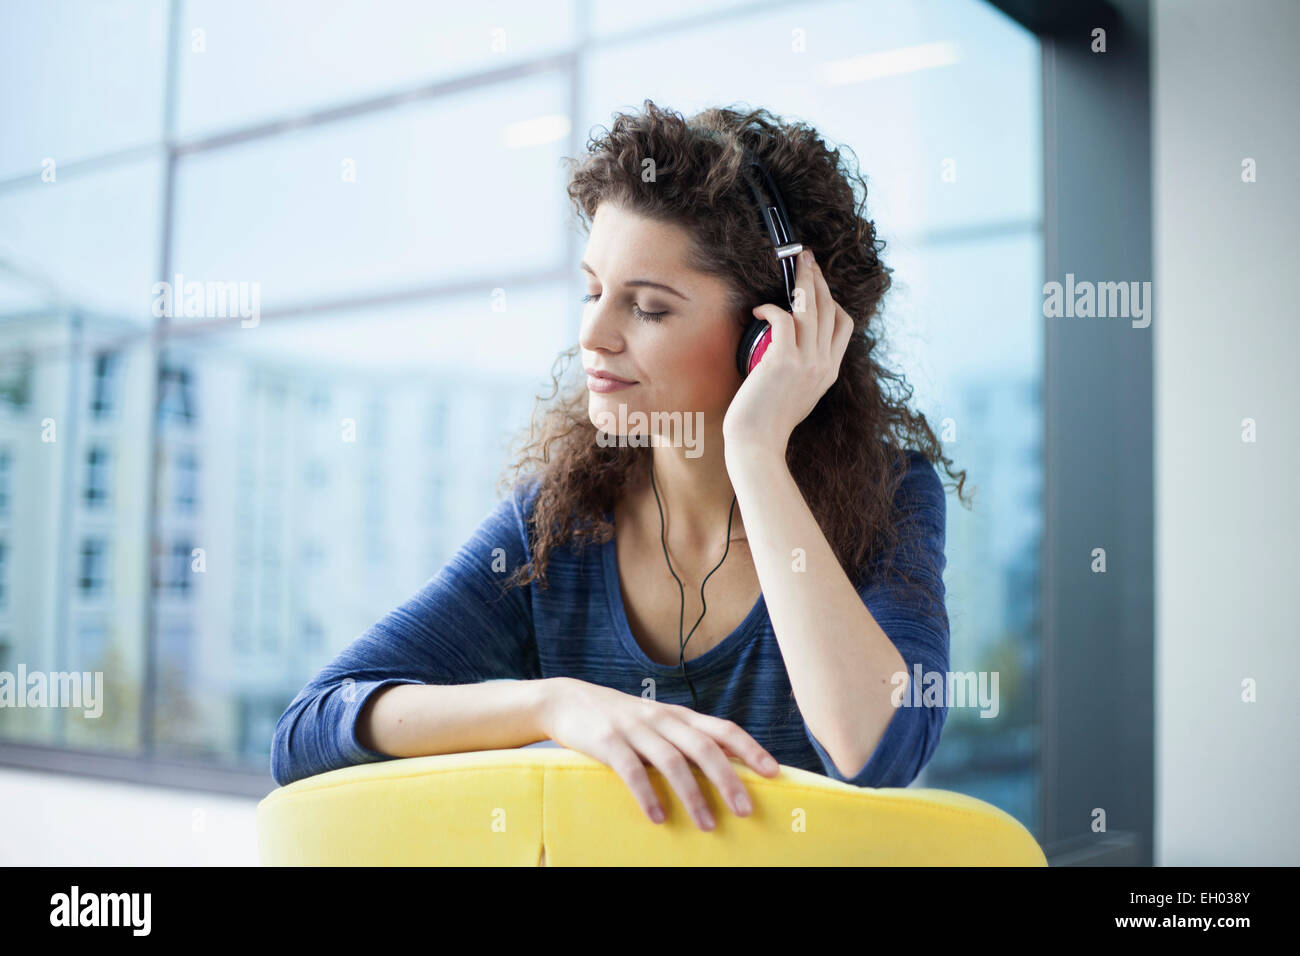 Young woman wearing headphones at the window Stock Photo